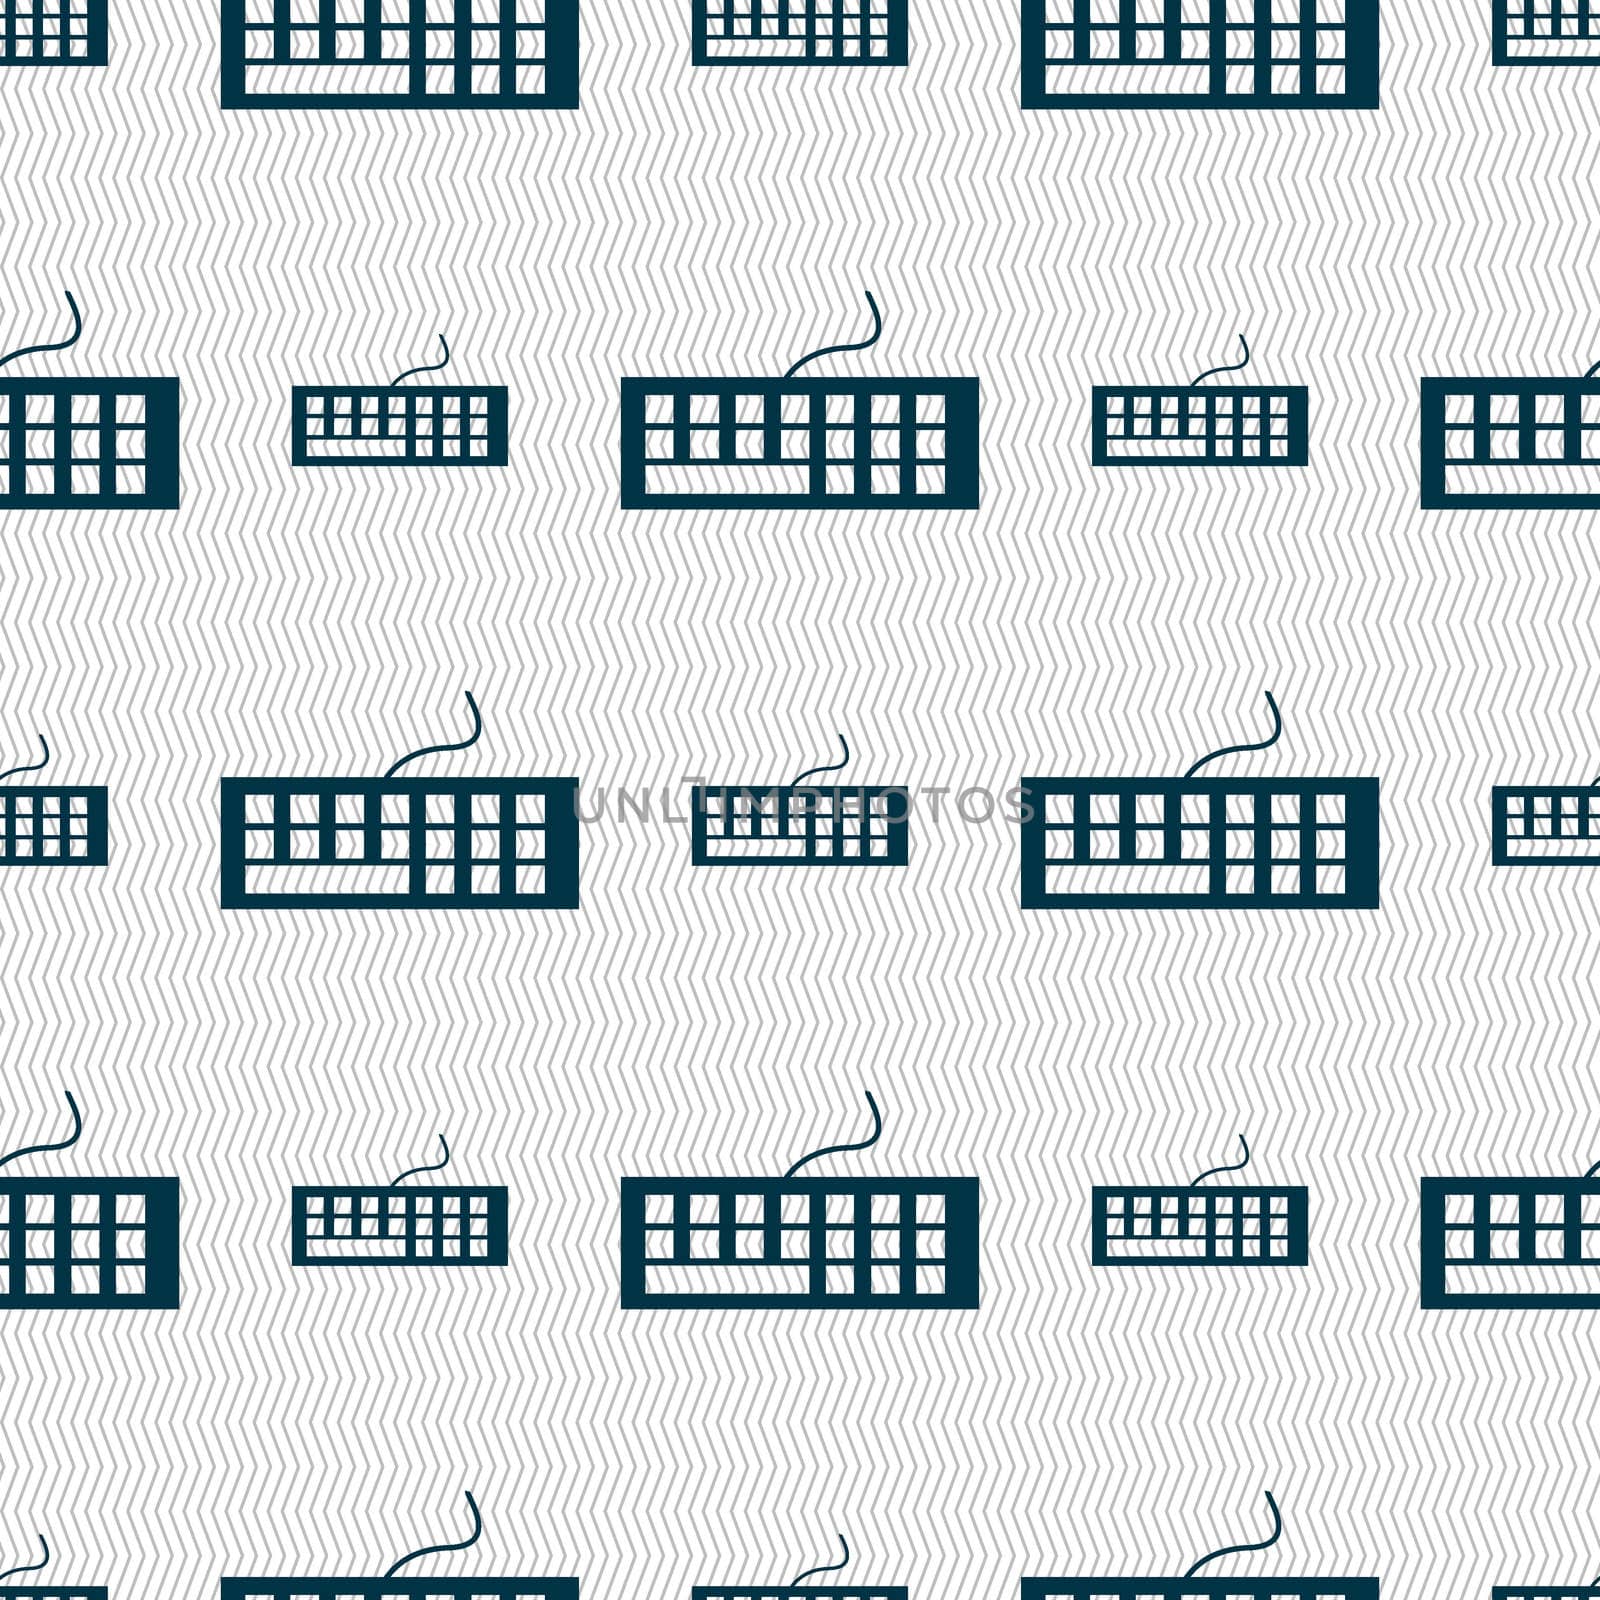 Computer keyboard Icon. Seamless abstract background with geometric shapes. illustration